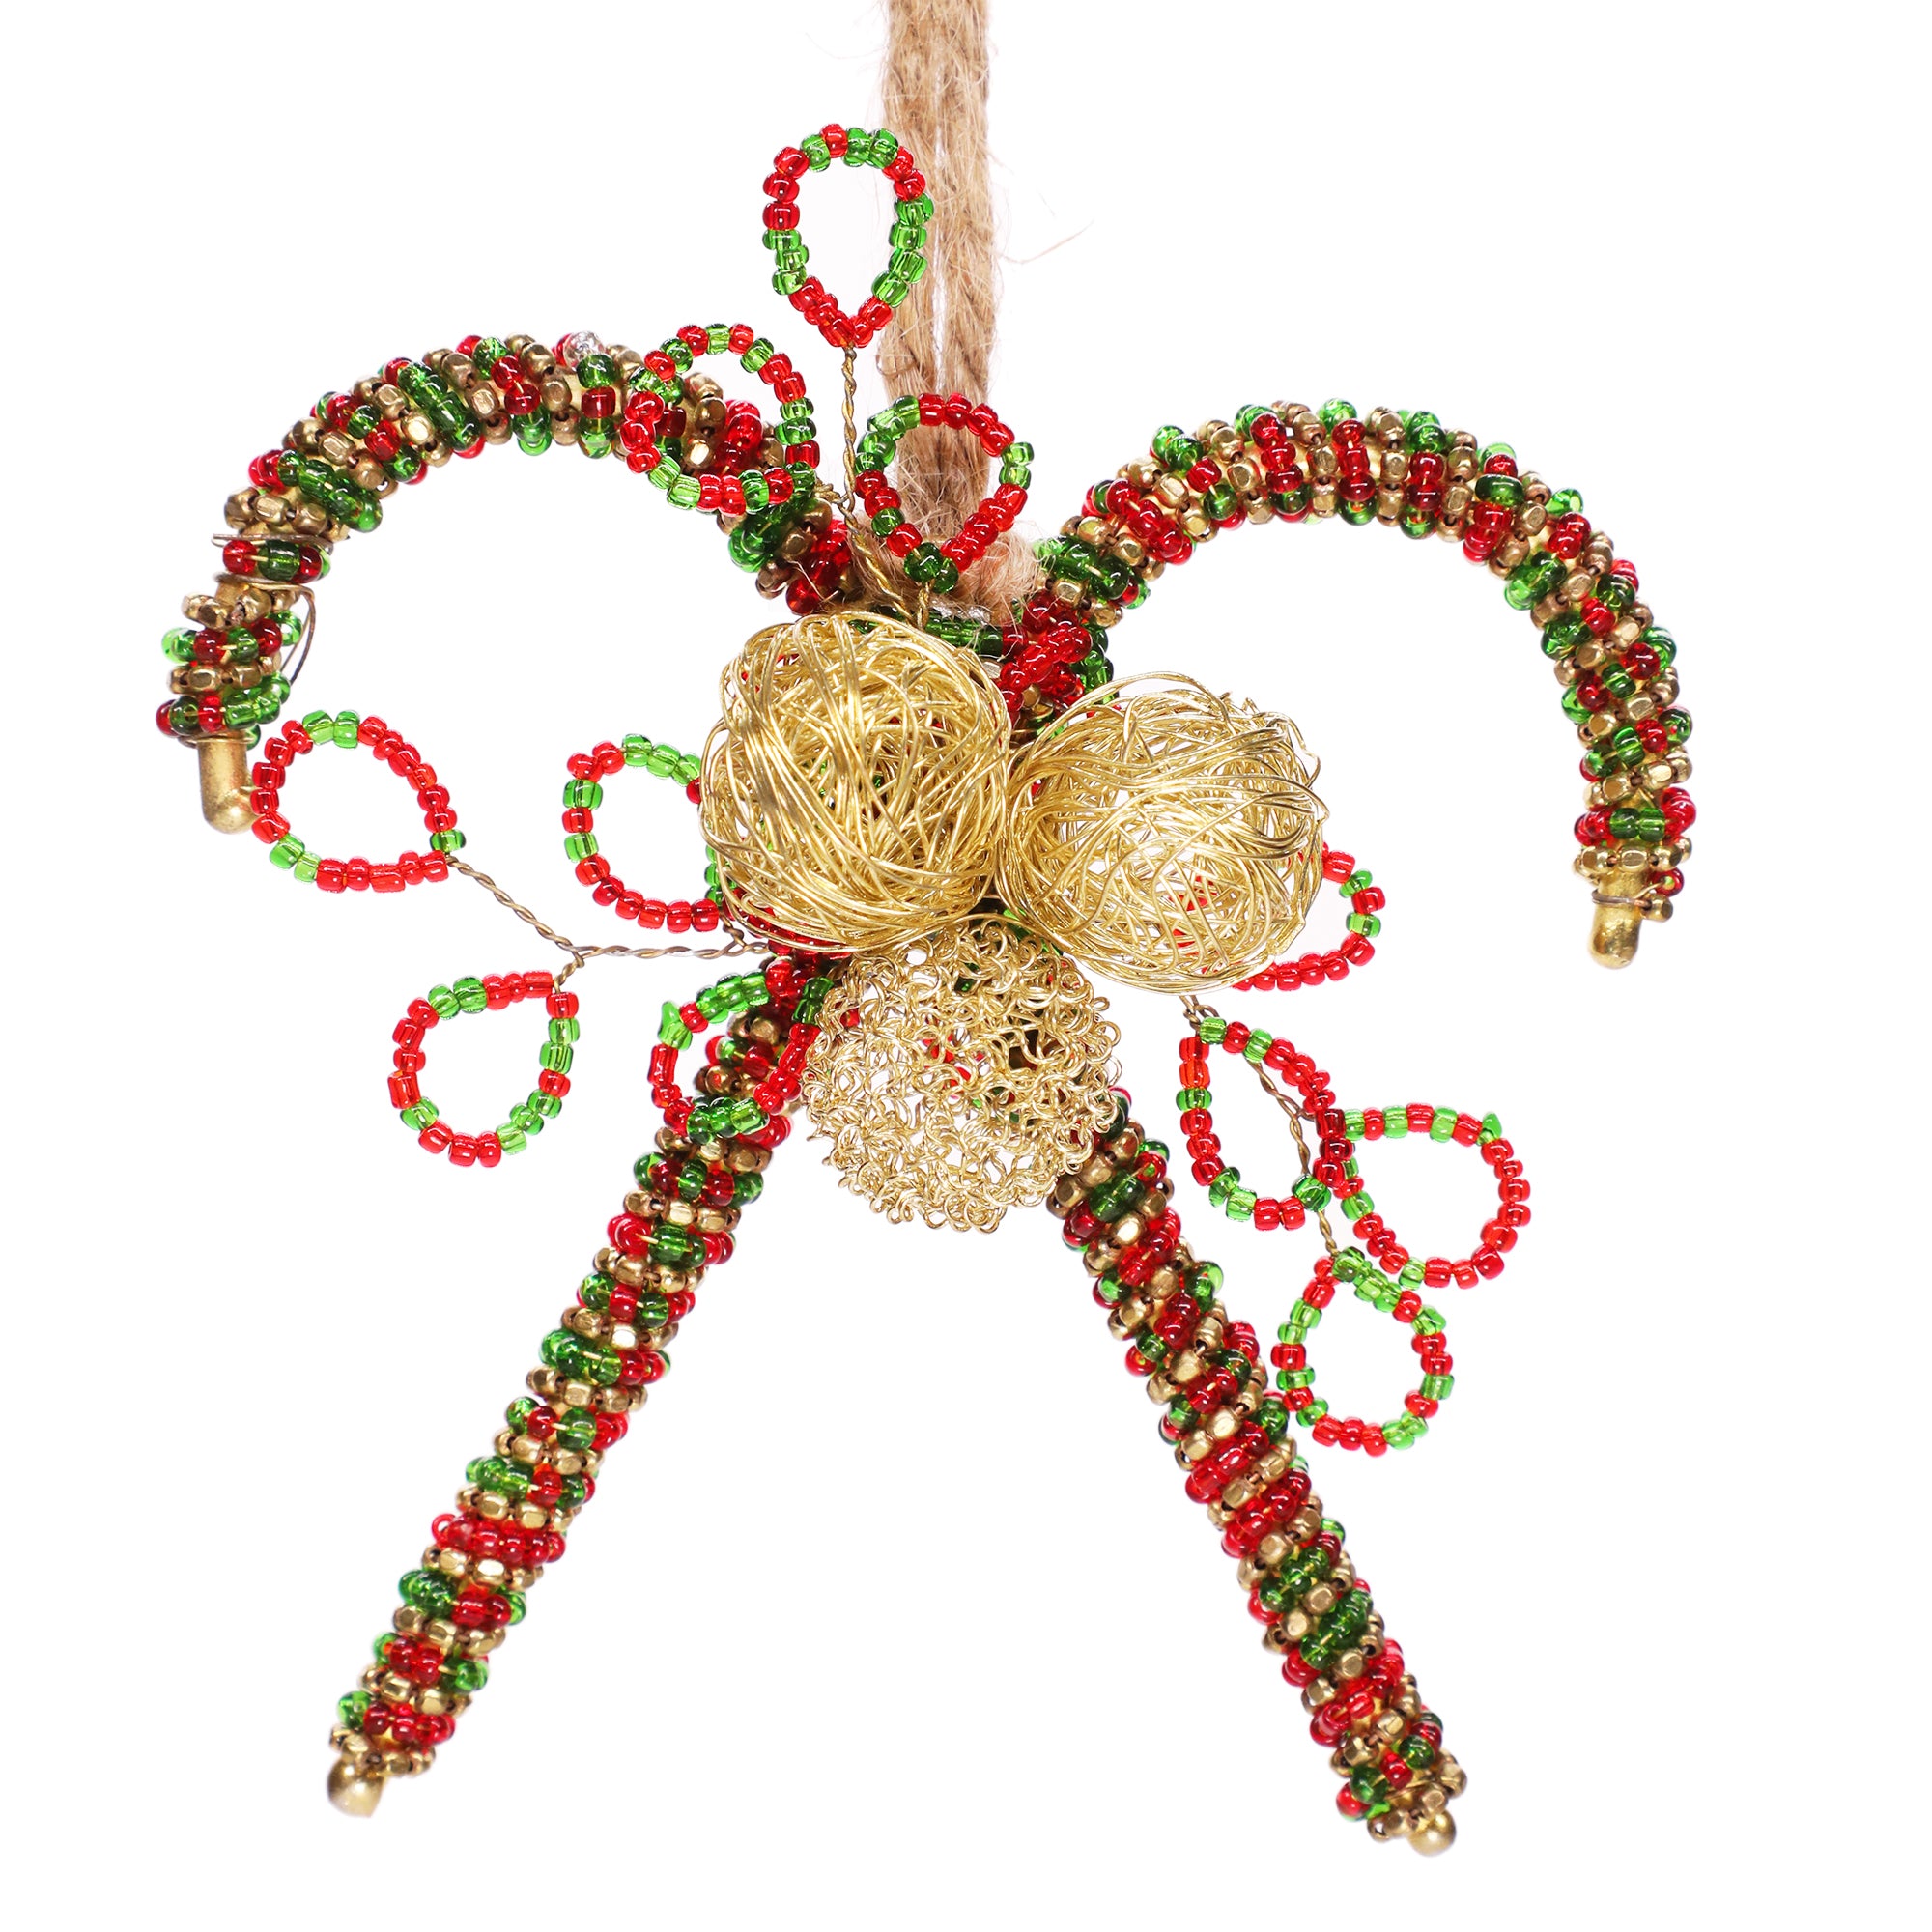 Soul Mates Beaded Holiday Candy Hangings / Red, Green & Gold/ 3.5"x4" / Set of 2